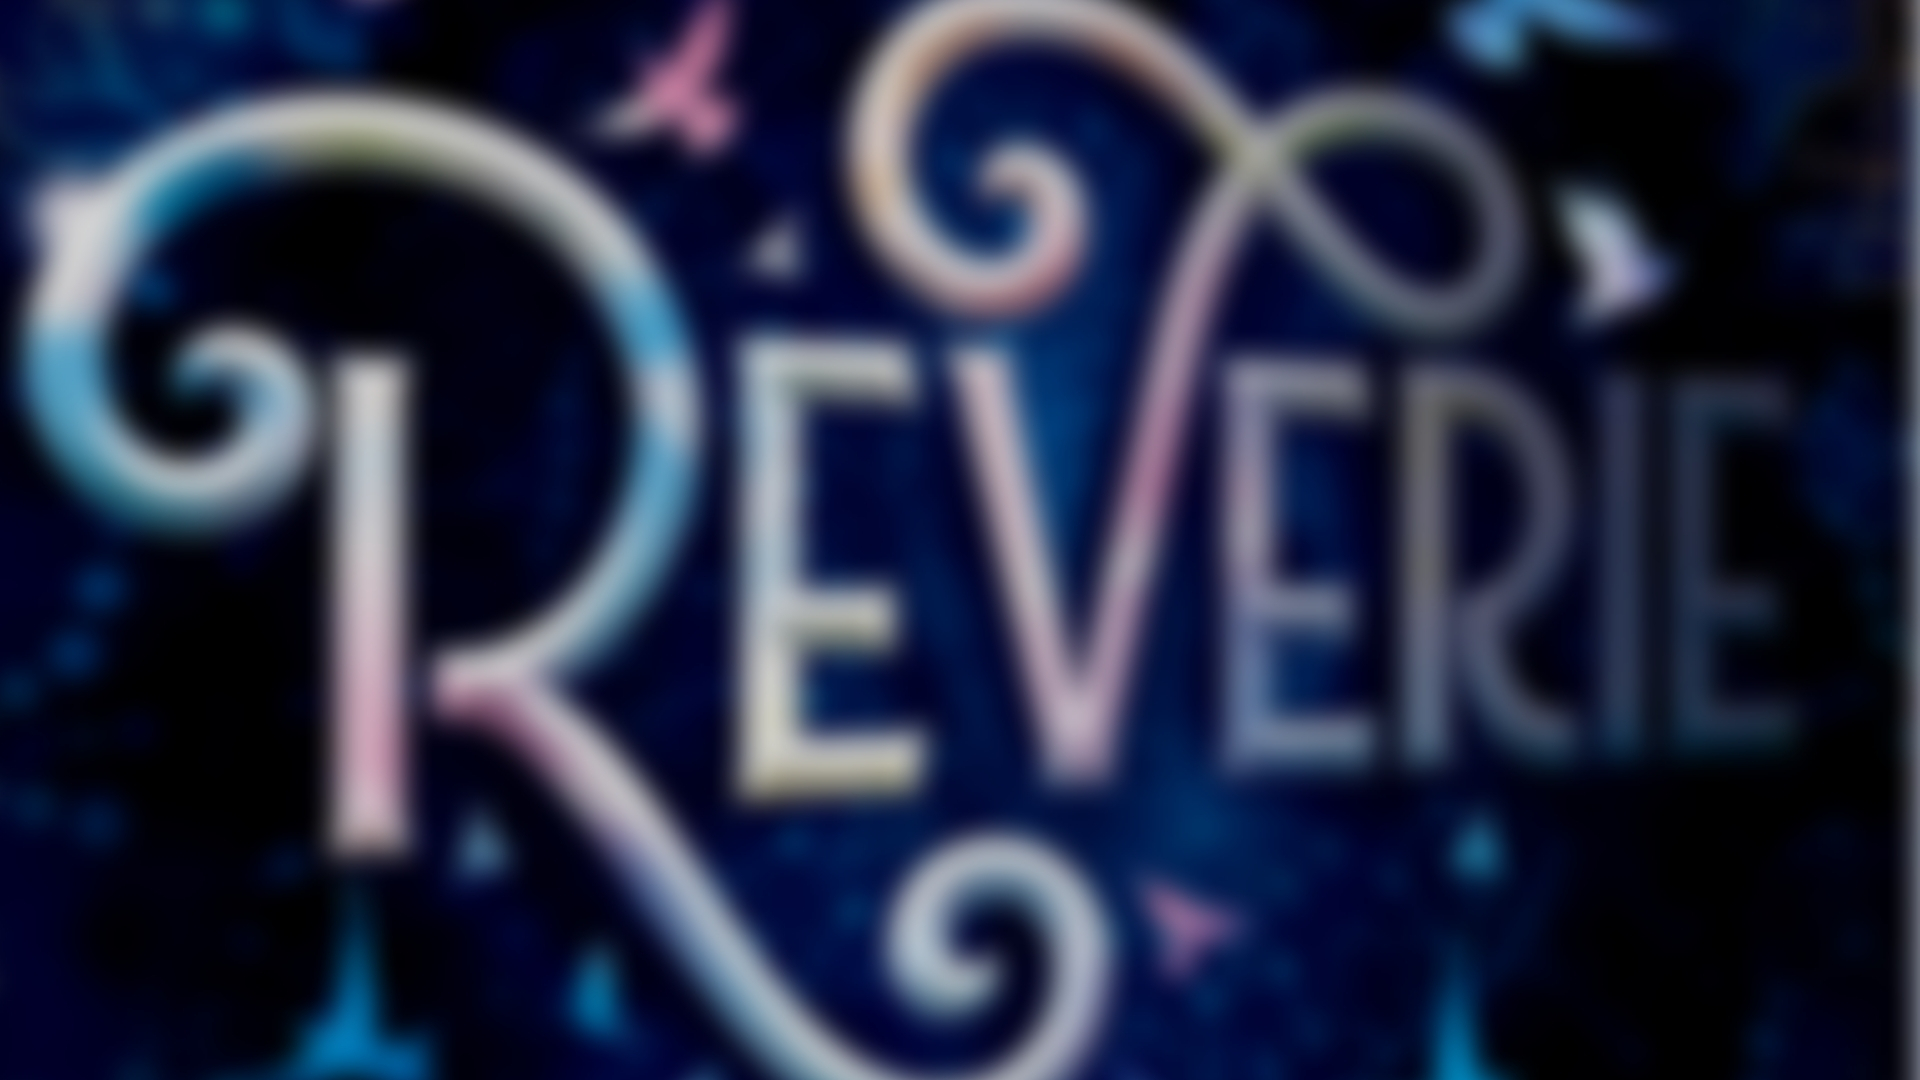 Reverie cover image, blurred